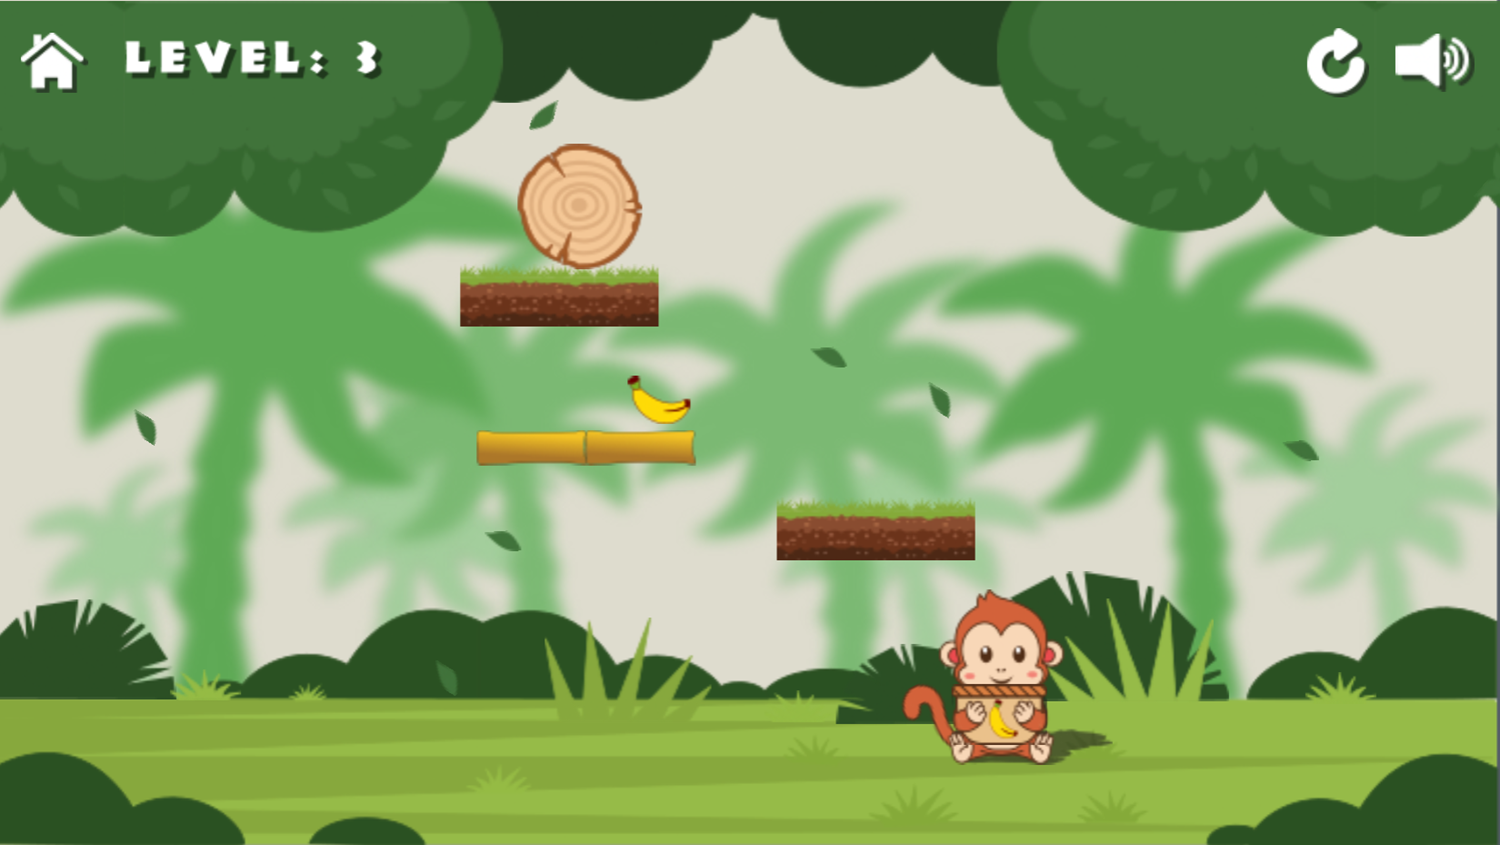 Monkeys and Fruits Game Level With Bamboo Screenshot.